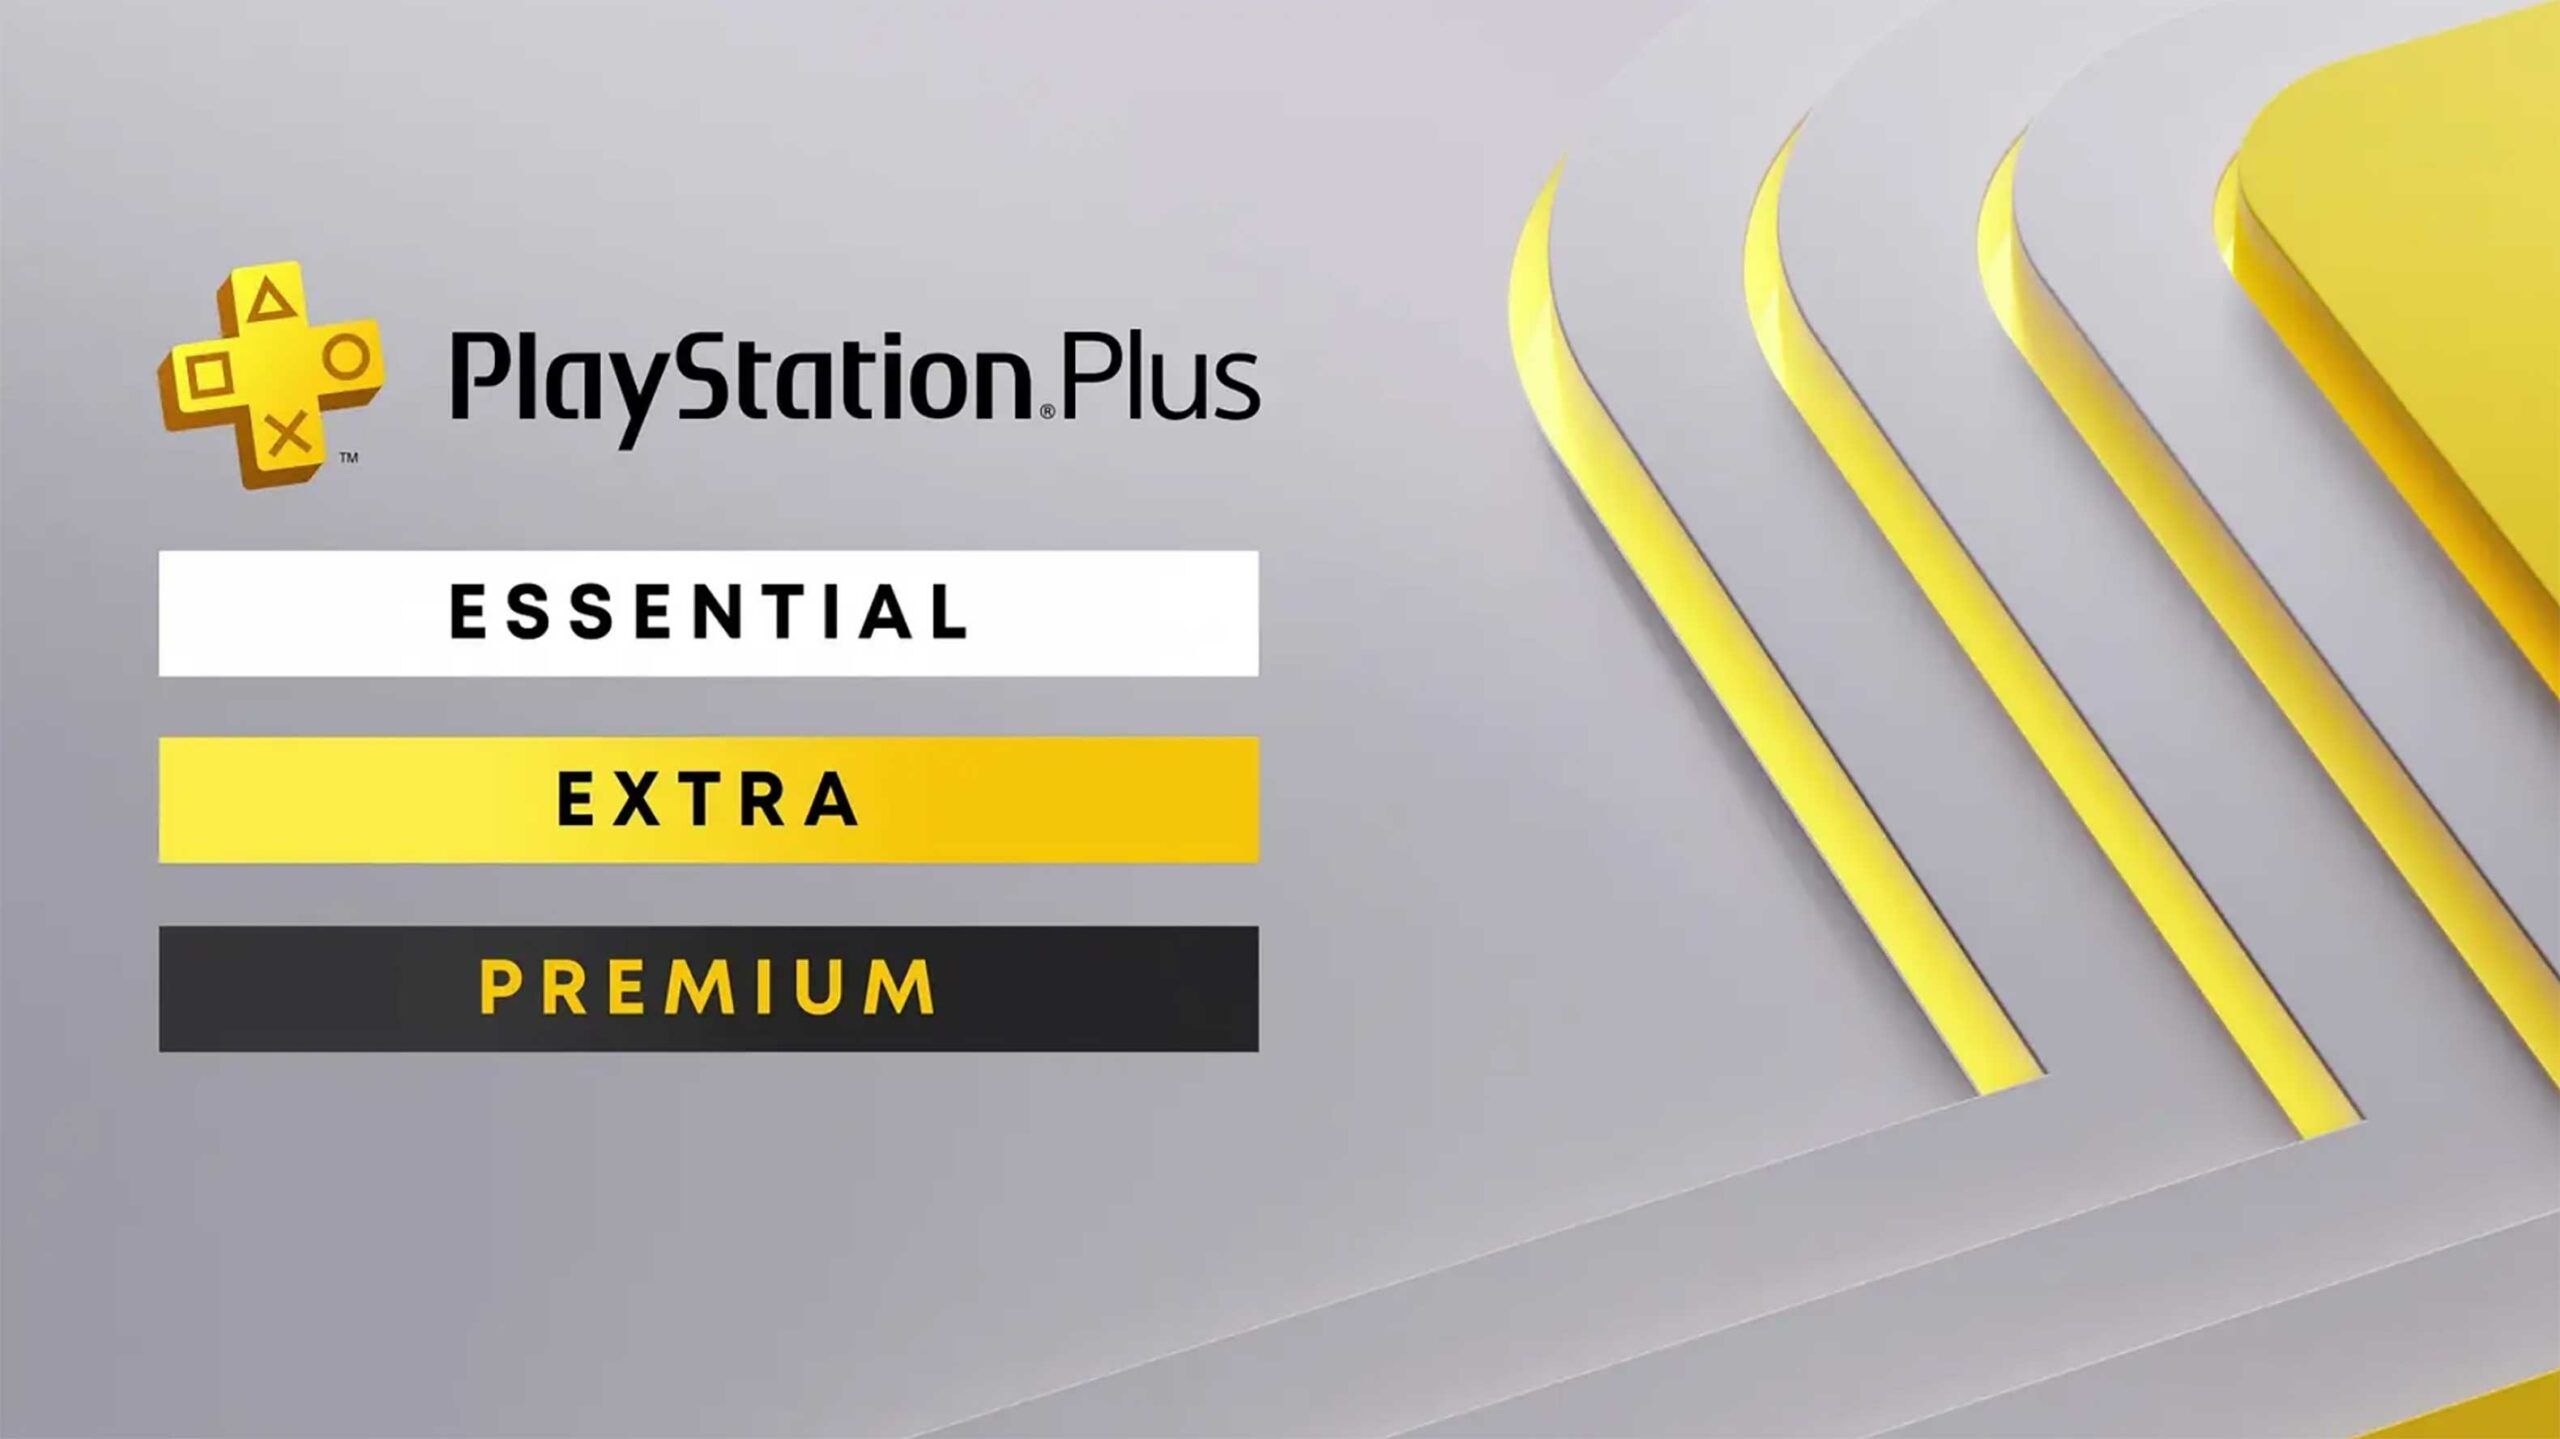 Key art for the new PlayStation Plus. The three tiers are listed: Essential, Extra and Premium.